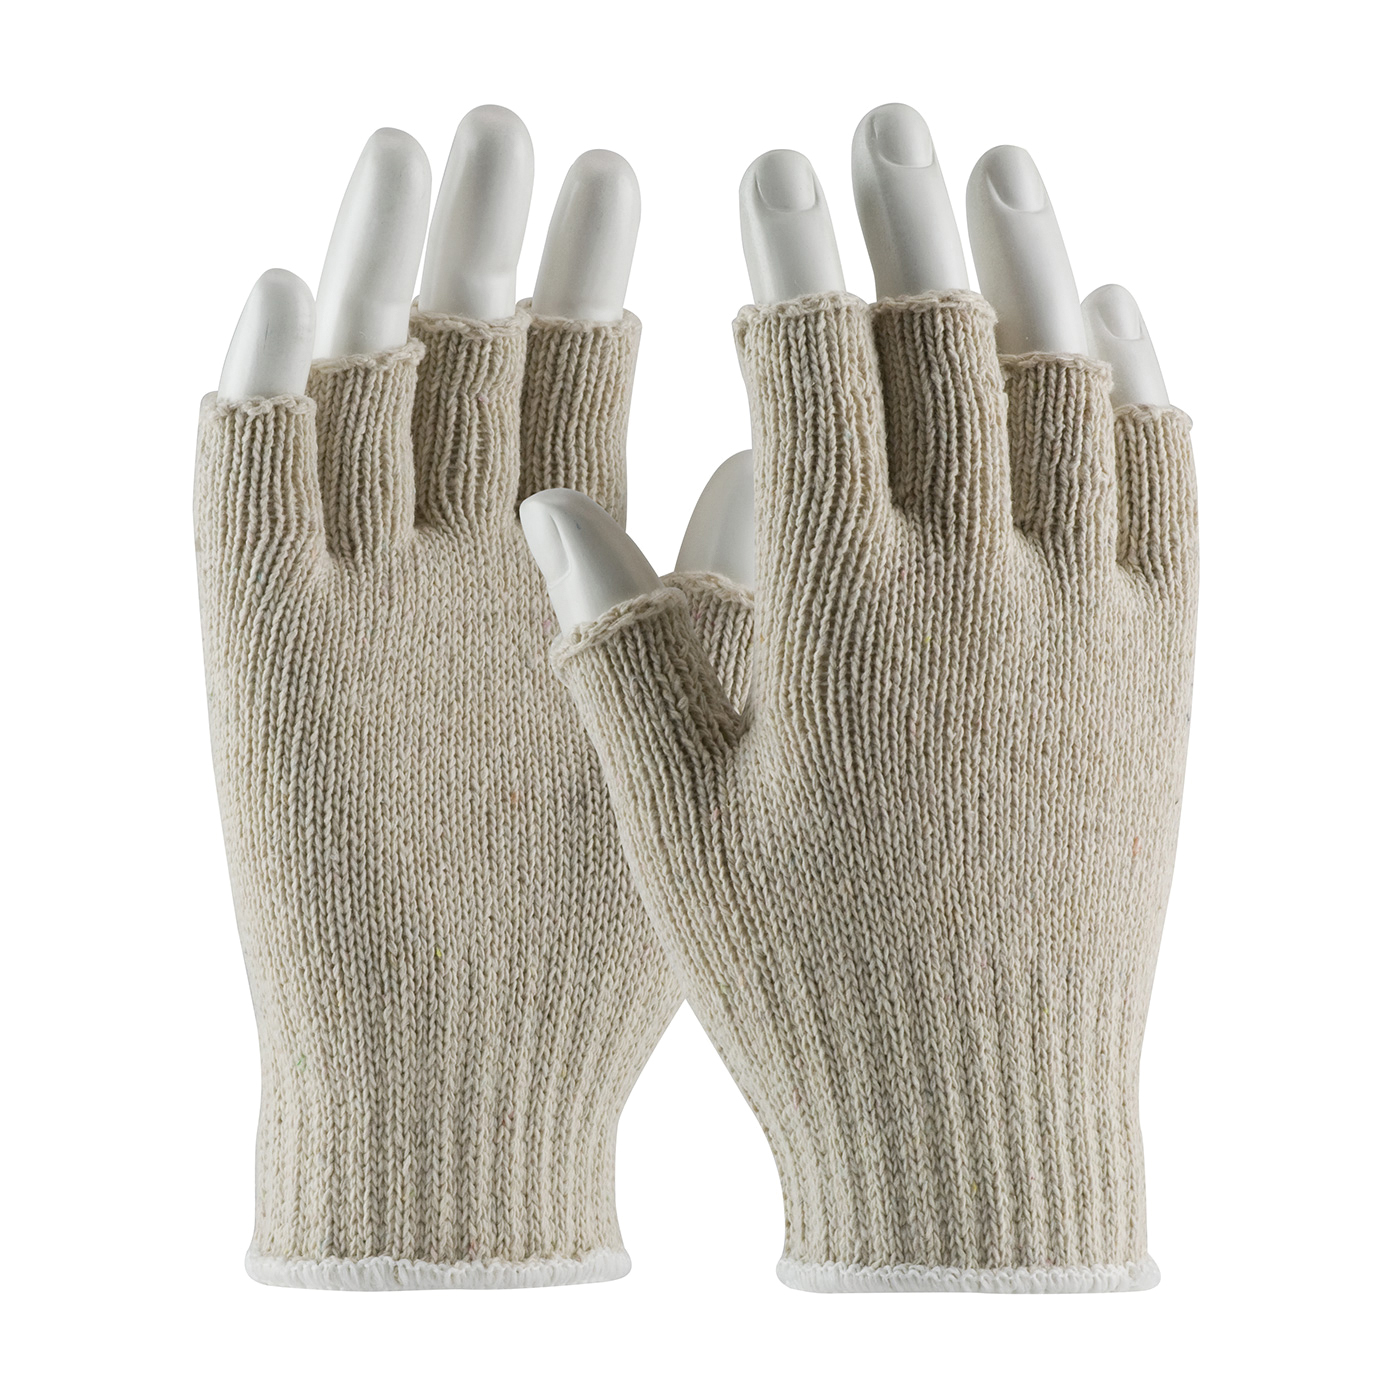 PIP® 35-C119/S 35-C119 Medium Weight General Purpose Gloves, Seamless Style, S, Cotton/Polyester Palm, 65% Cotton/35% Polyester, Natural, Continuous Knit Wrist Cuff, Uncoated Coating, Cotton/Polyester Lining